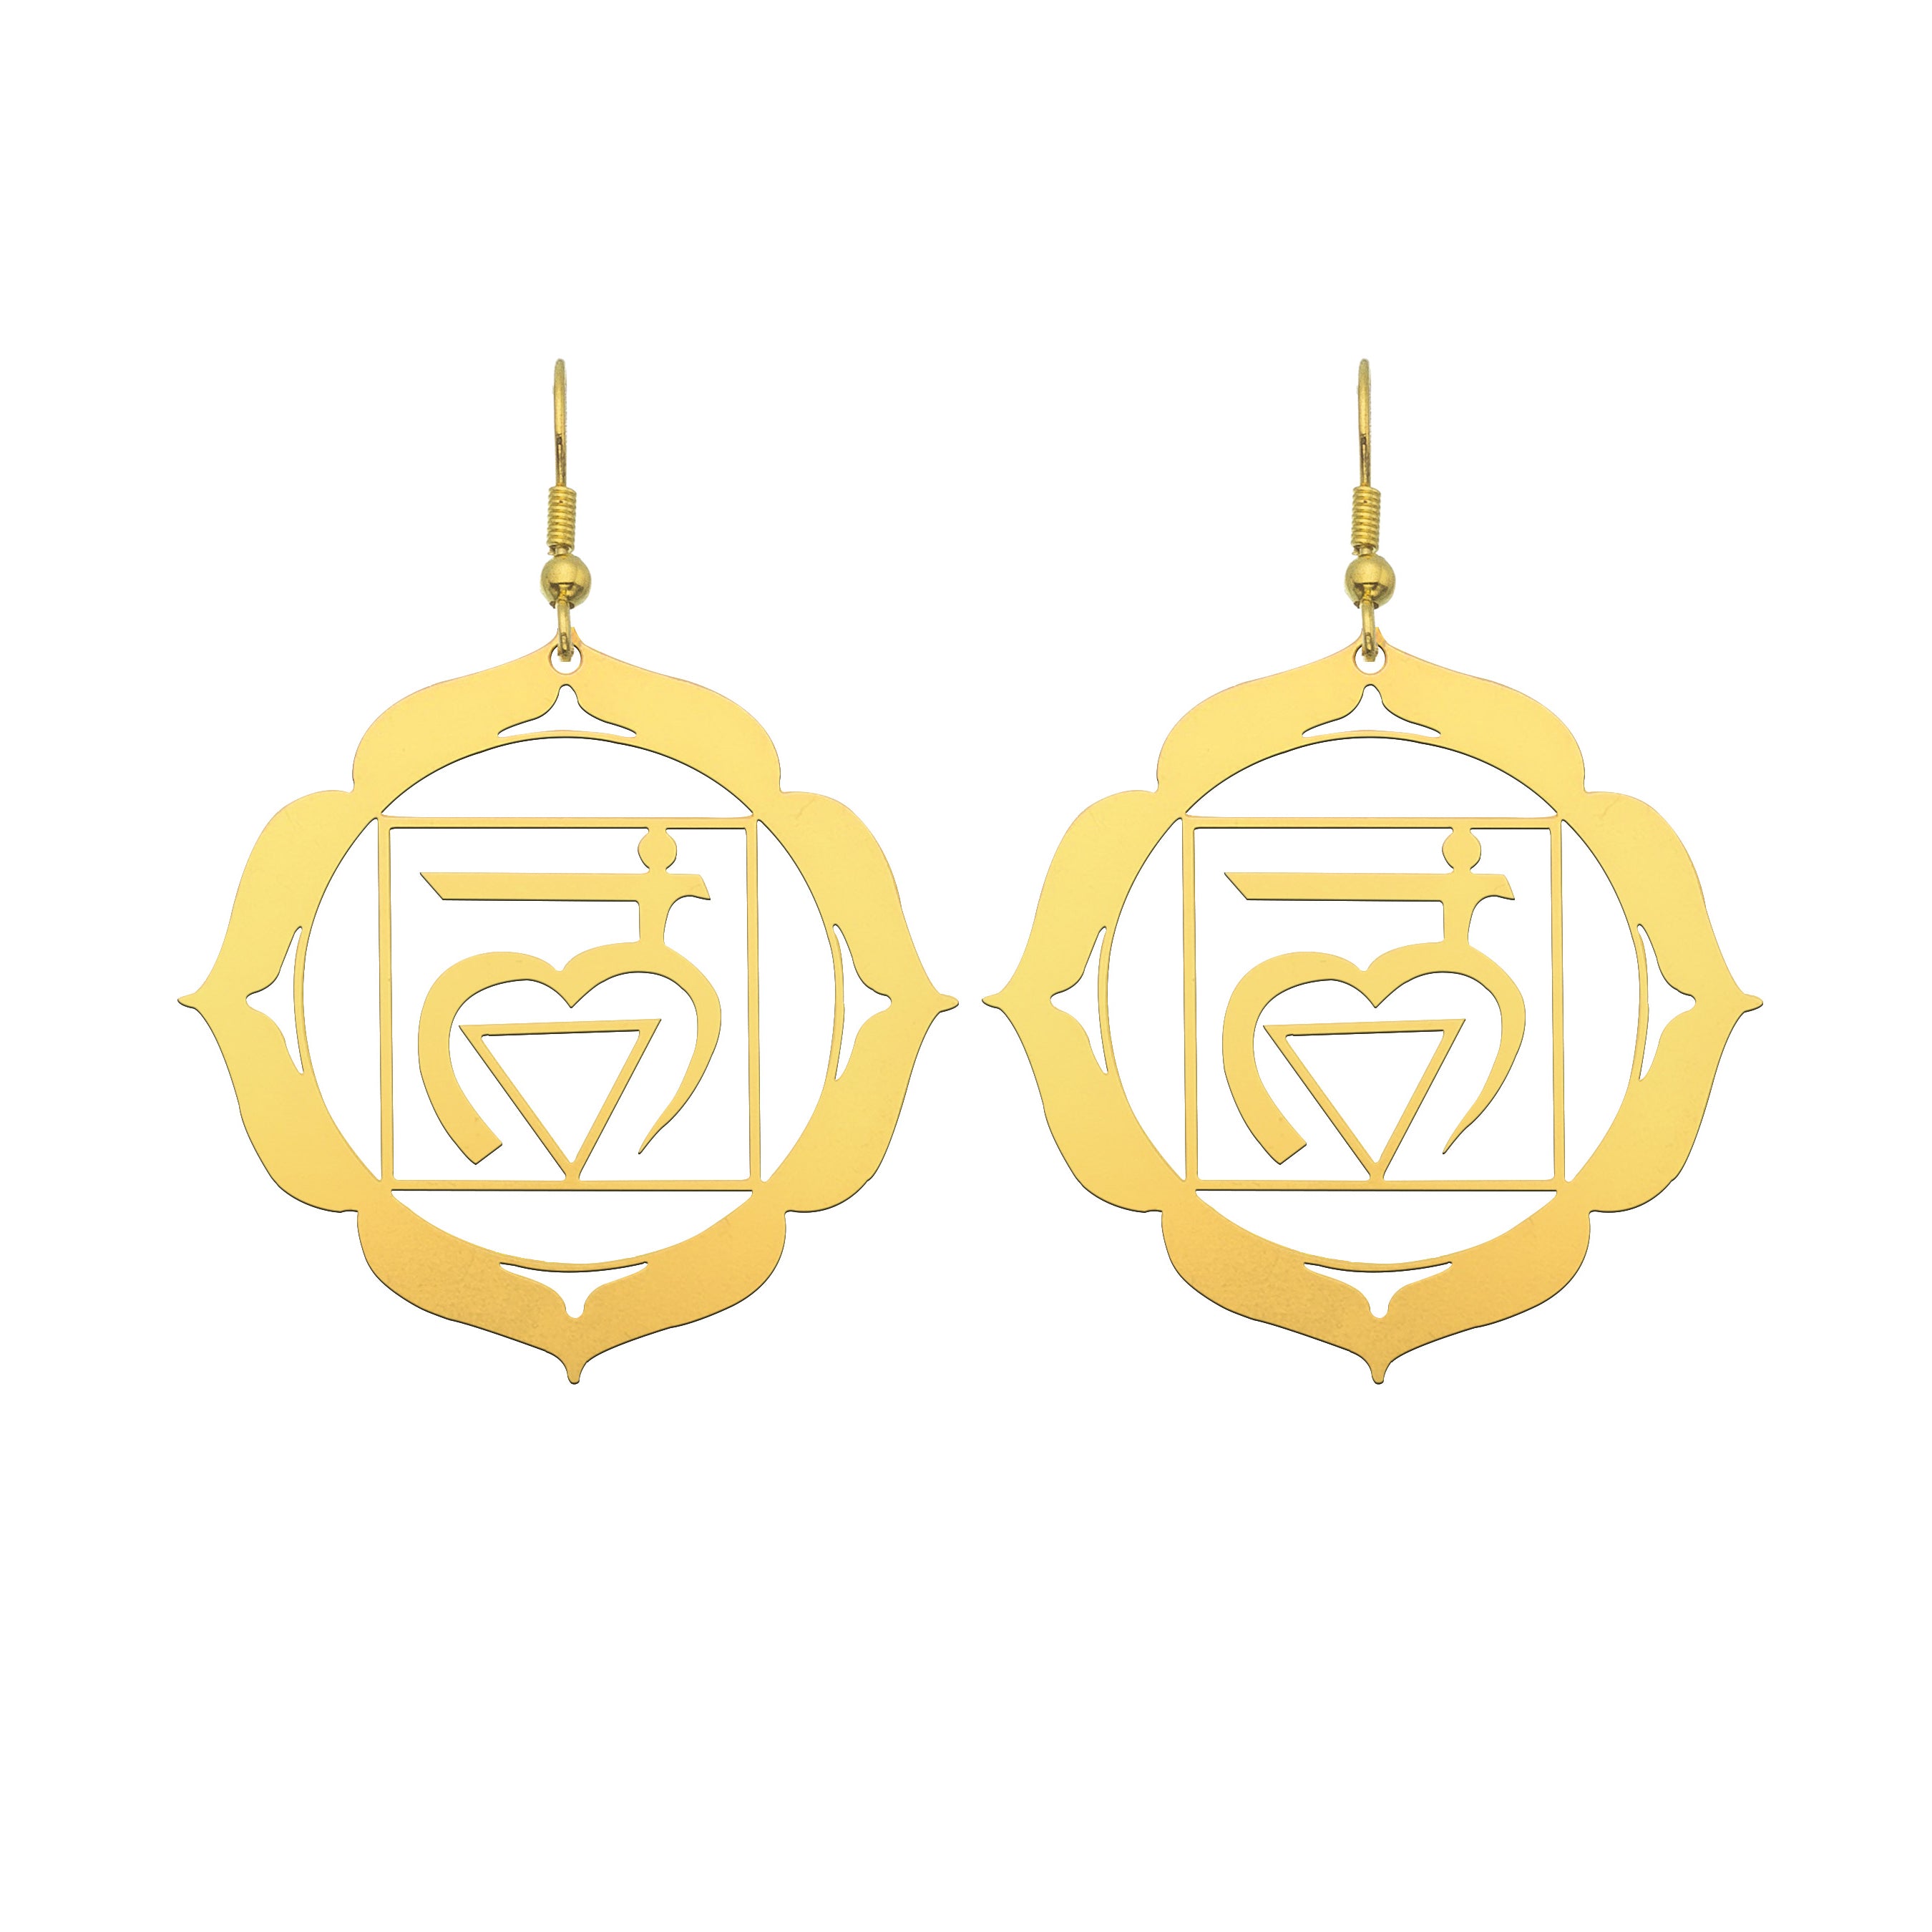 Root Chakra Earrings | The Root Chakra represents security